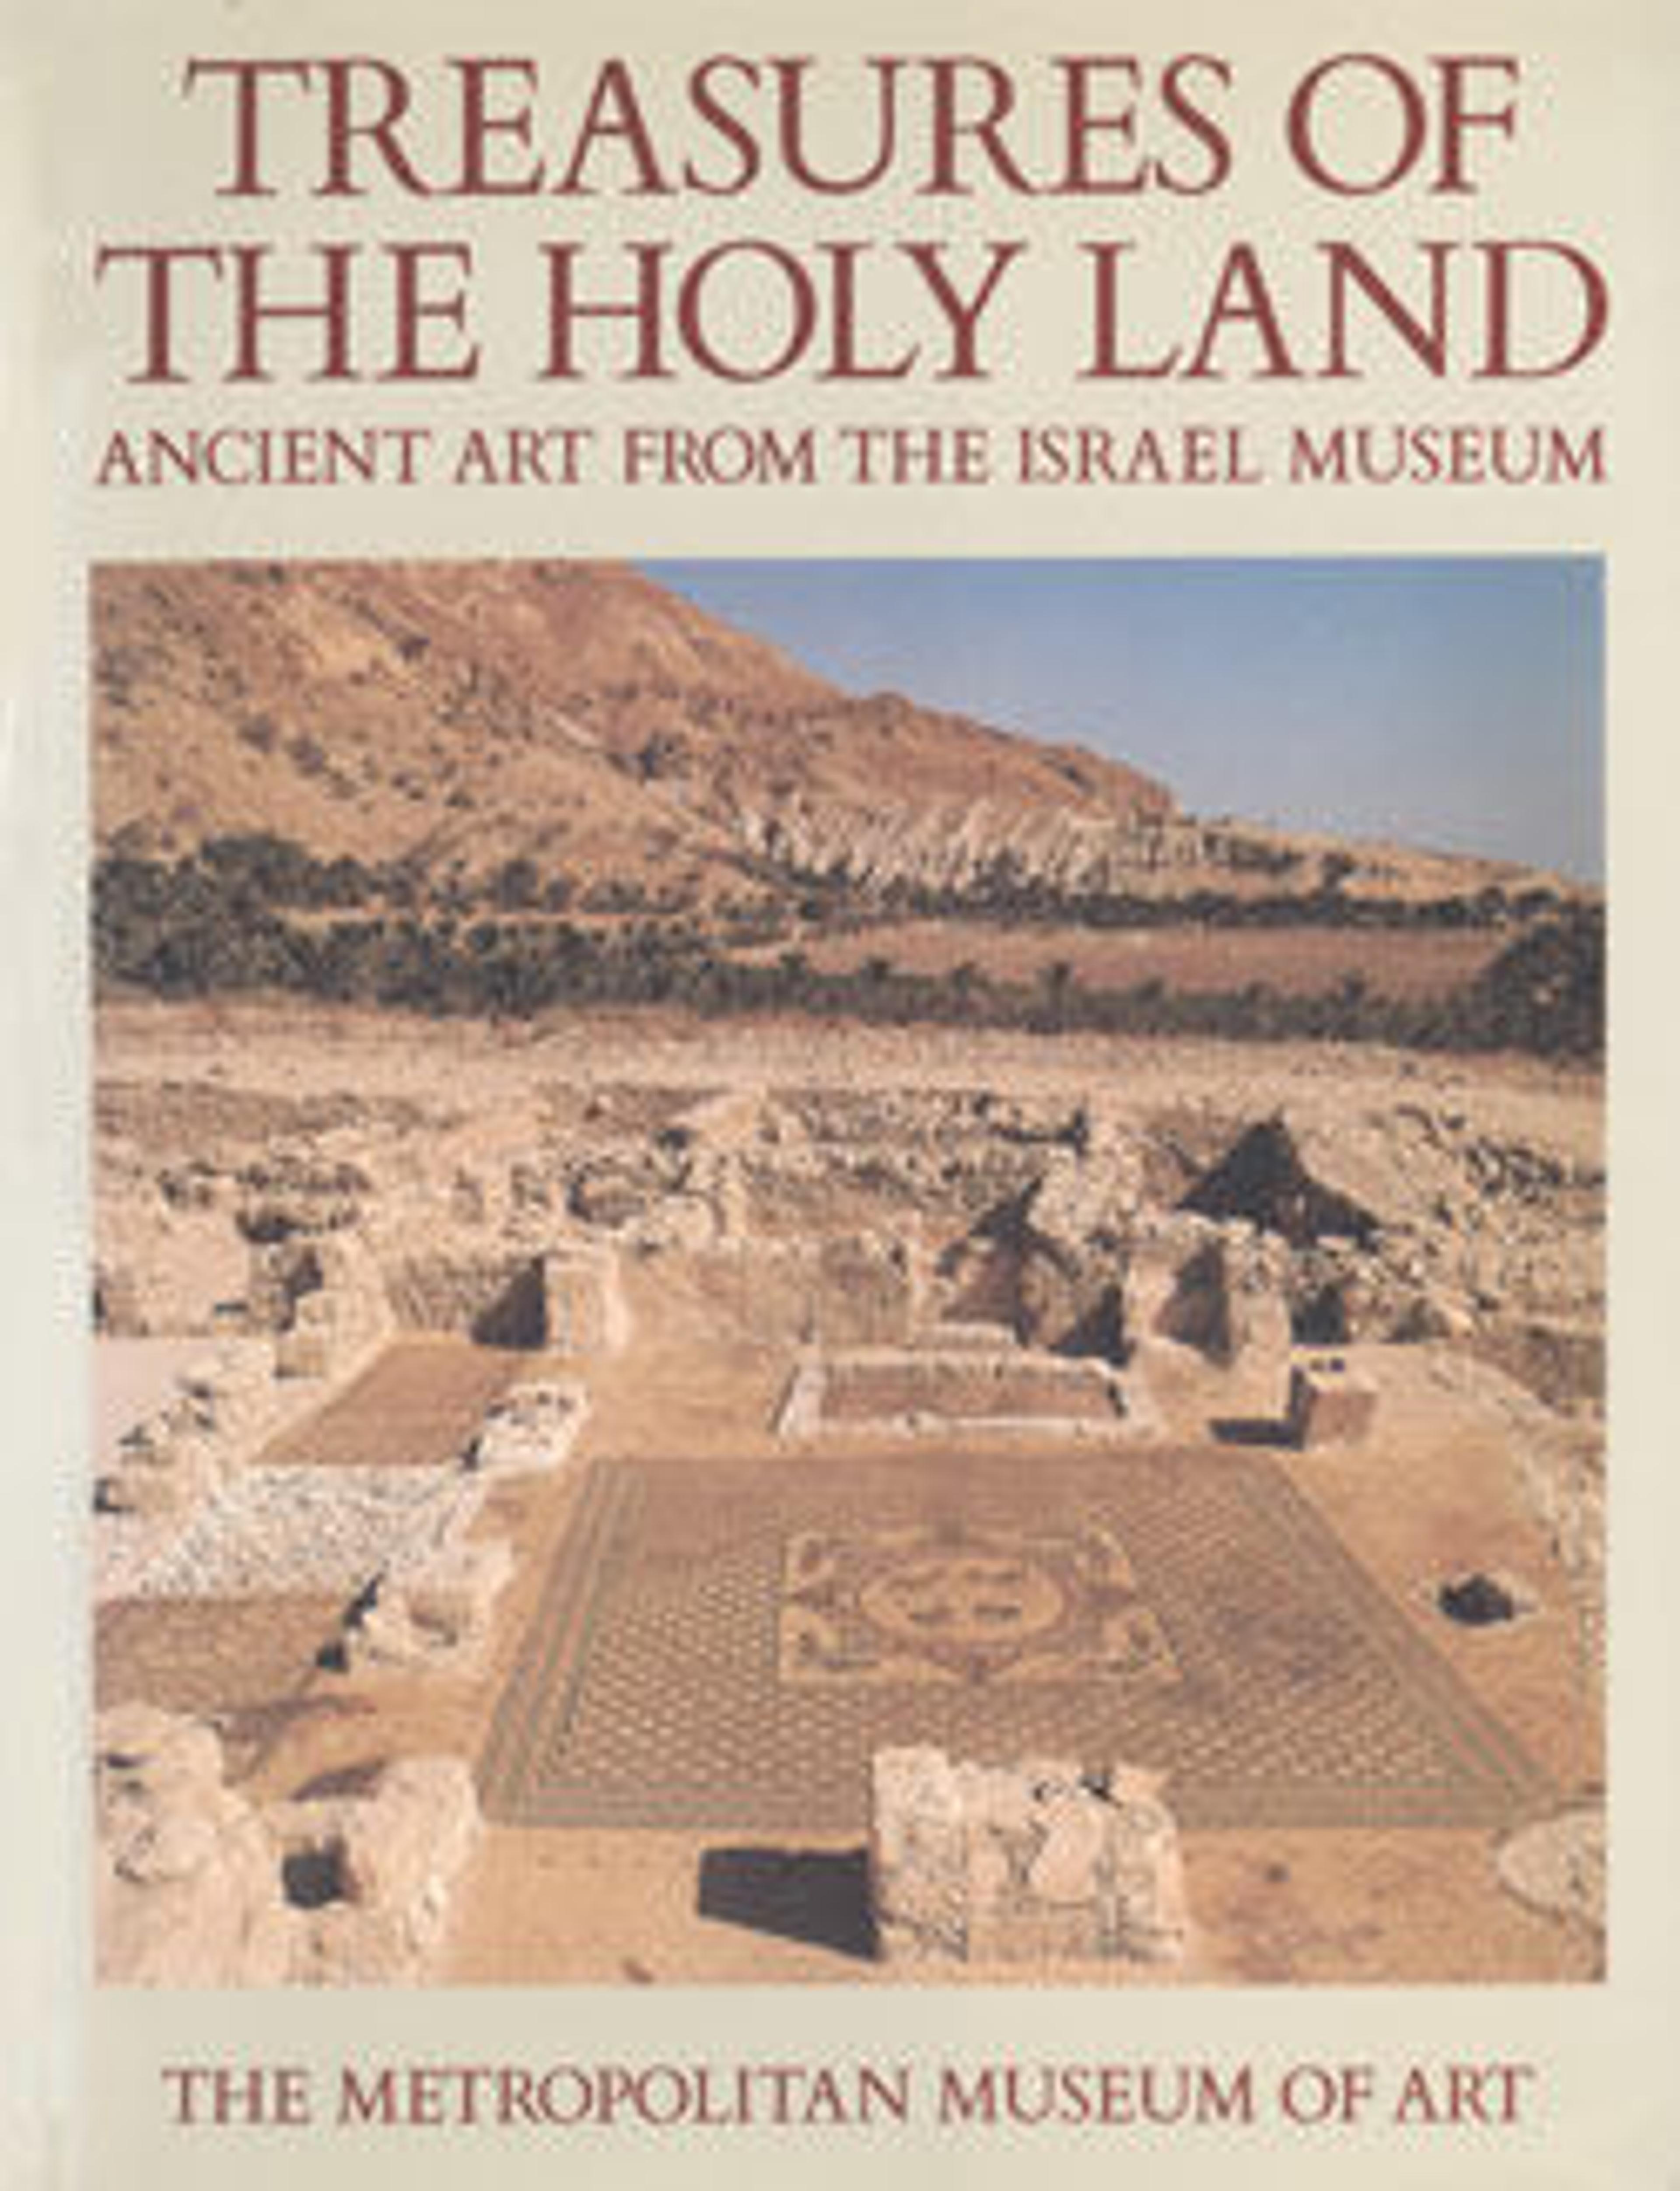 Treasures of the Holy Land: Ancient Art from the Israel Museum